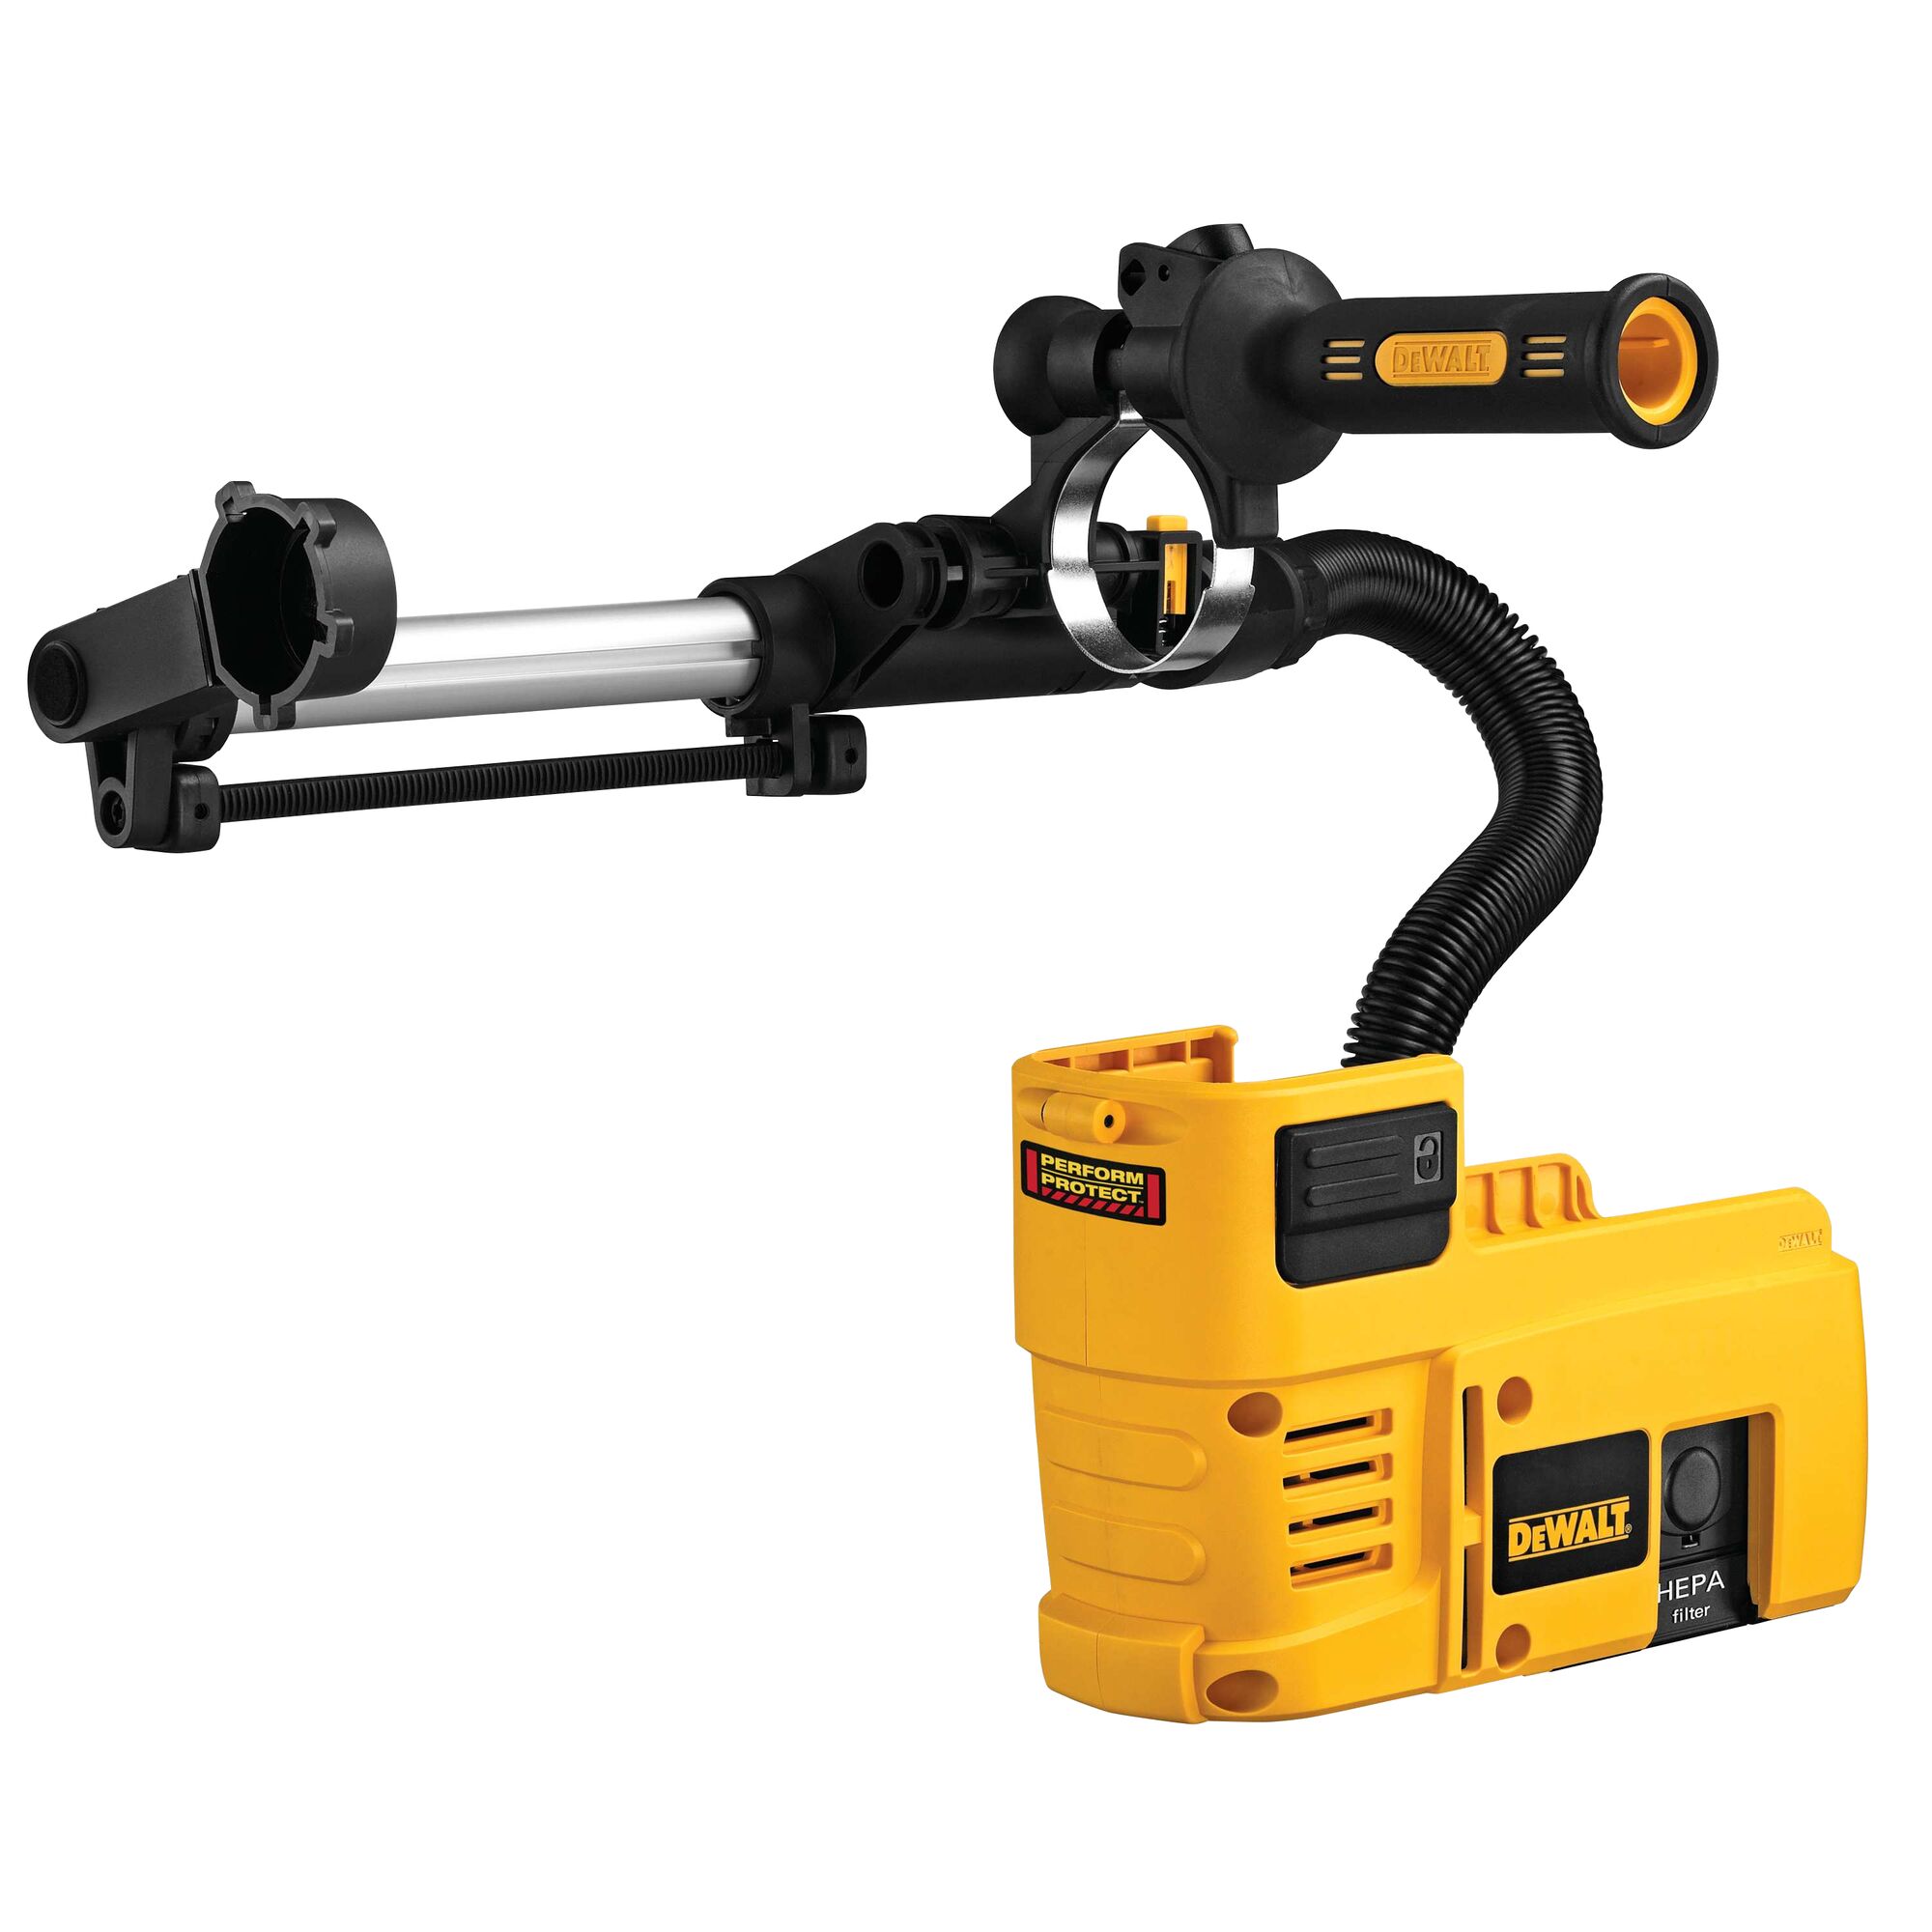 DEWALT D25300DH Dust Extraction System With HEPA Filter for sale online 